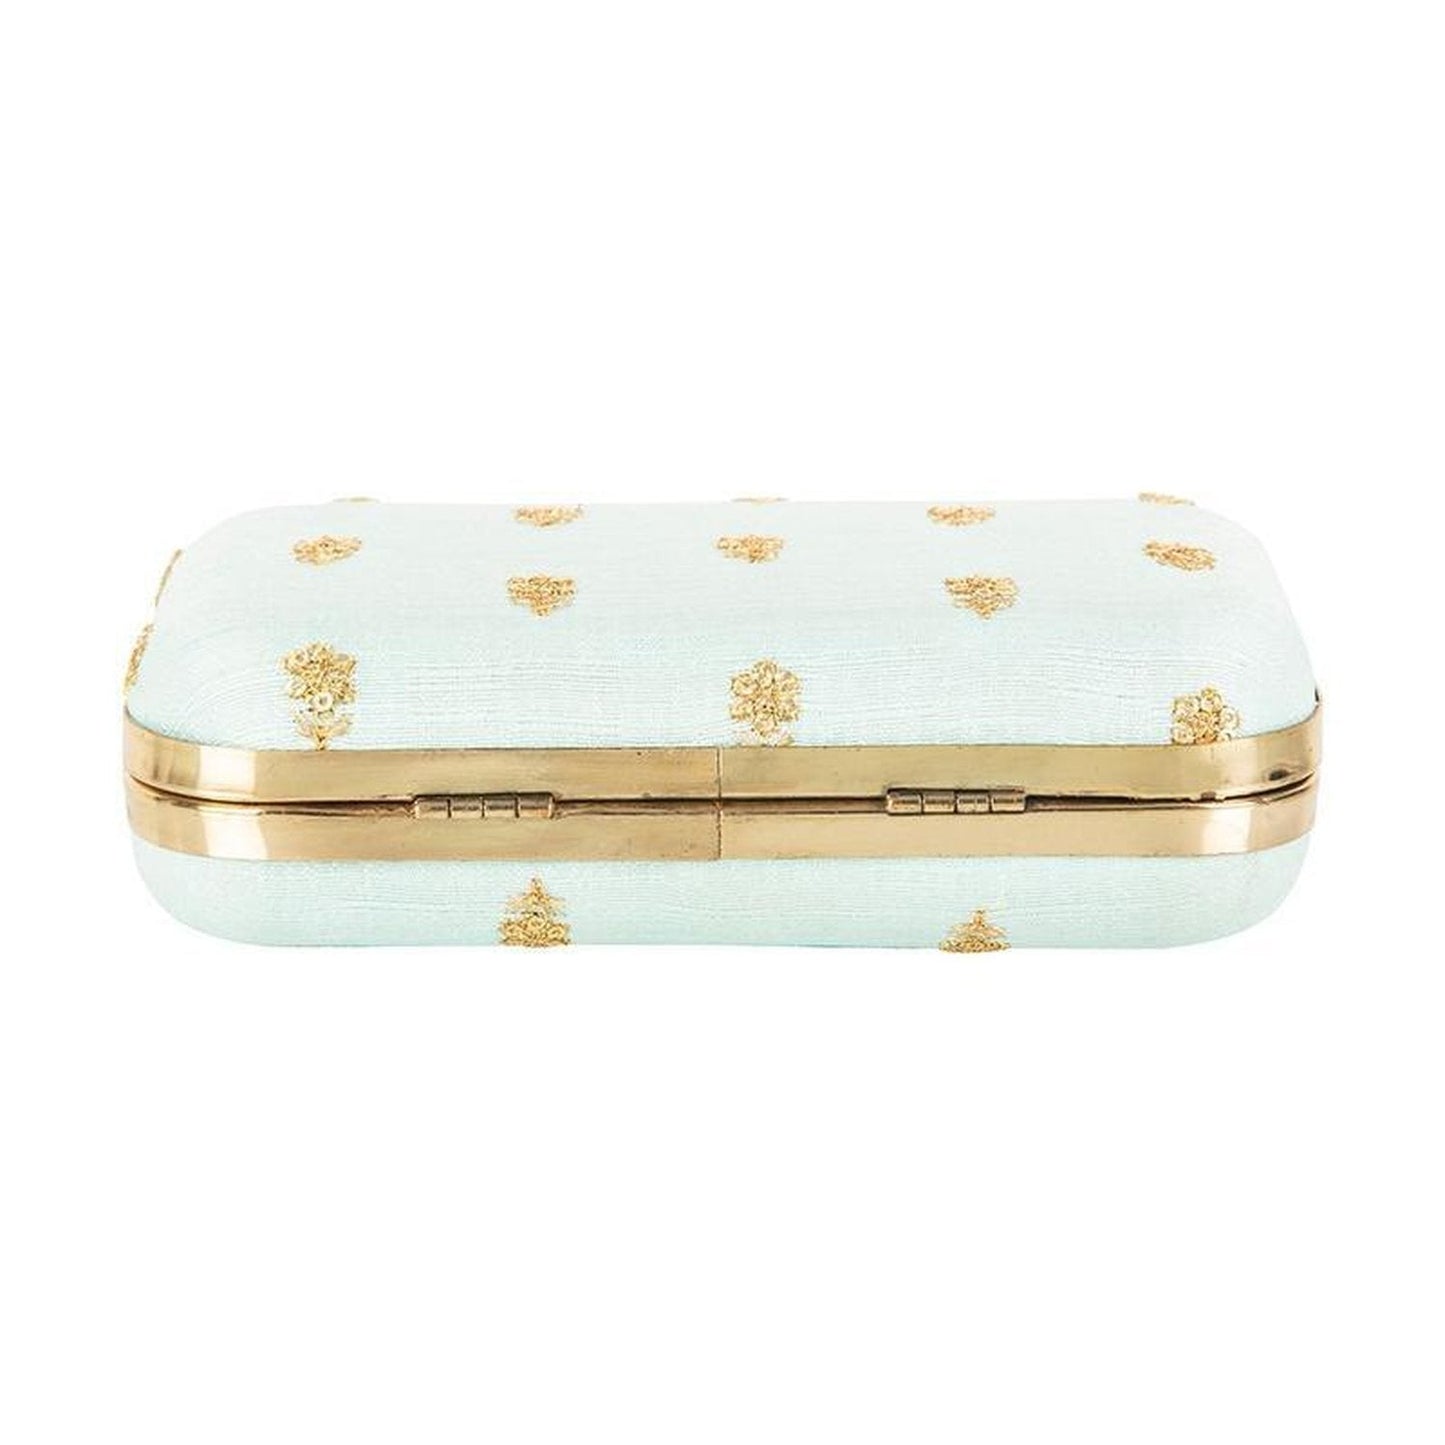 Light Blue and Golden Zari Embroidery Party wear Fancy Clutches - Stilento